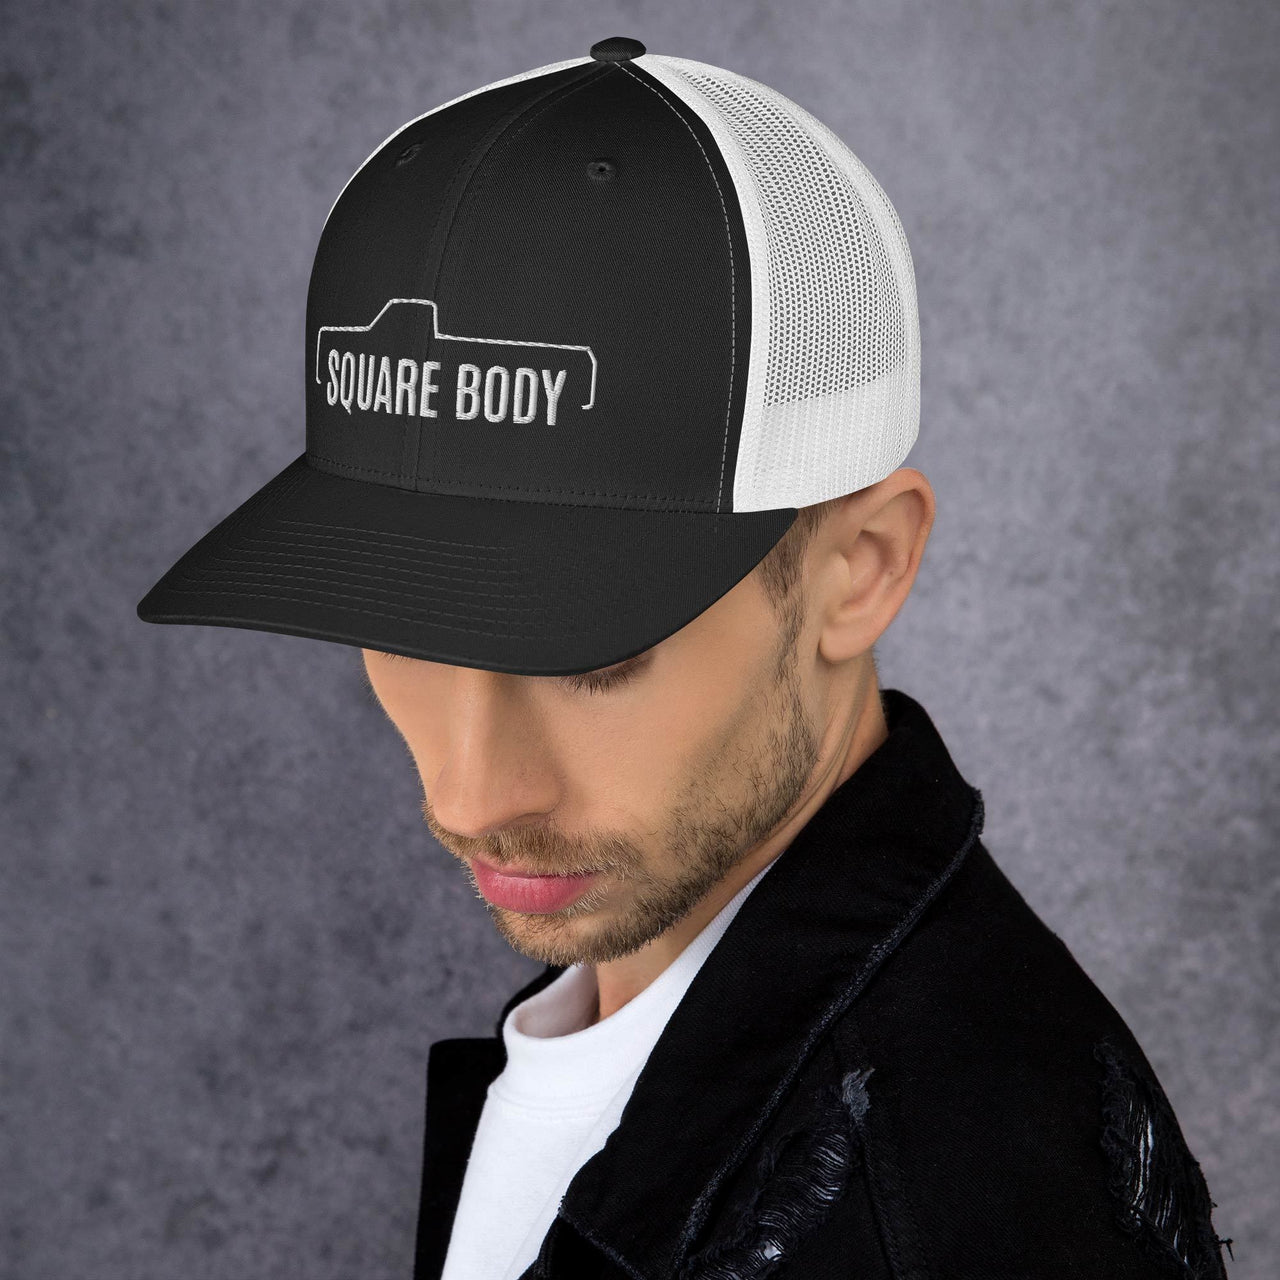 man wearing a Square body c10 k10 trucker hat from aggressive thread in black and white